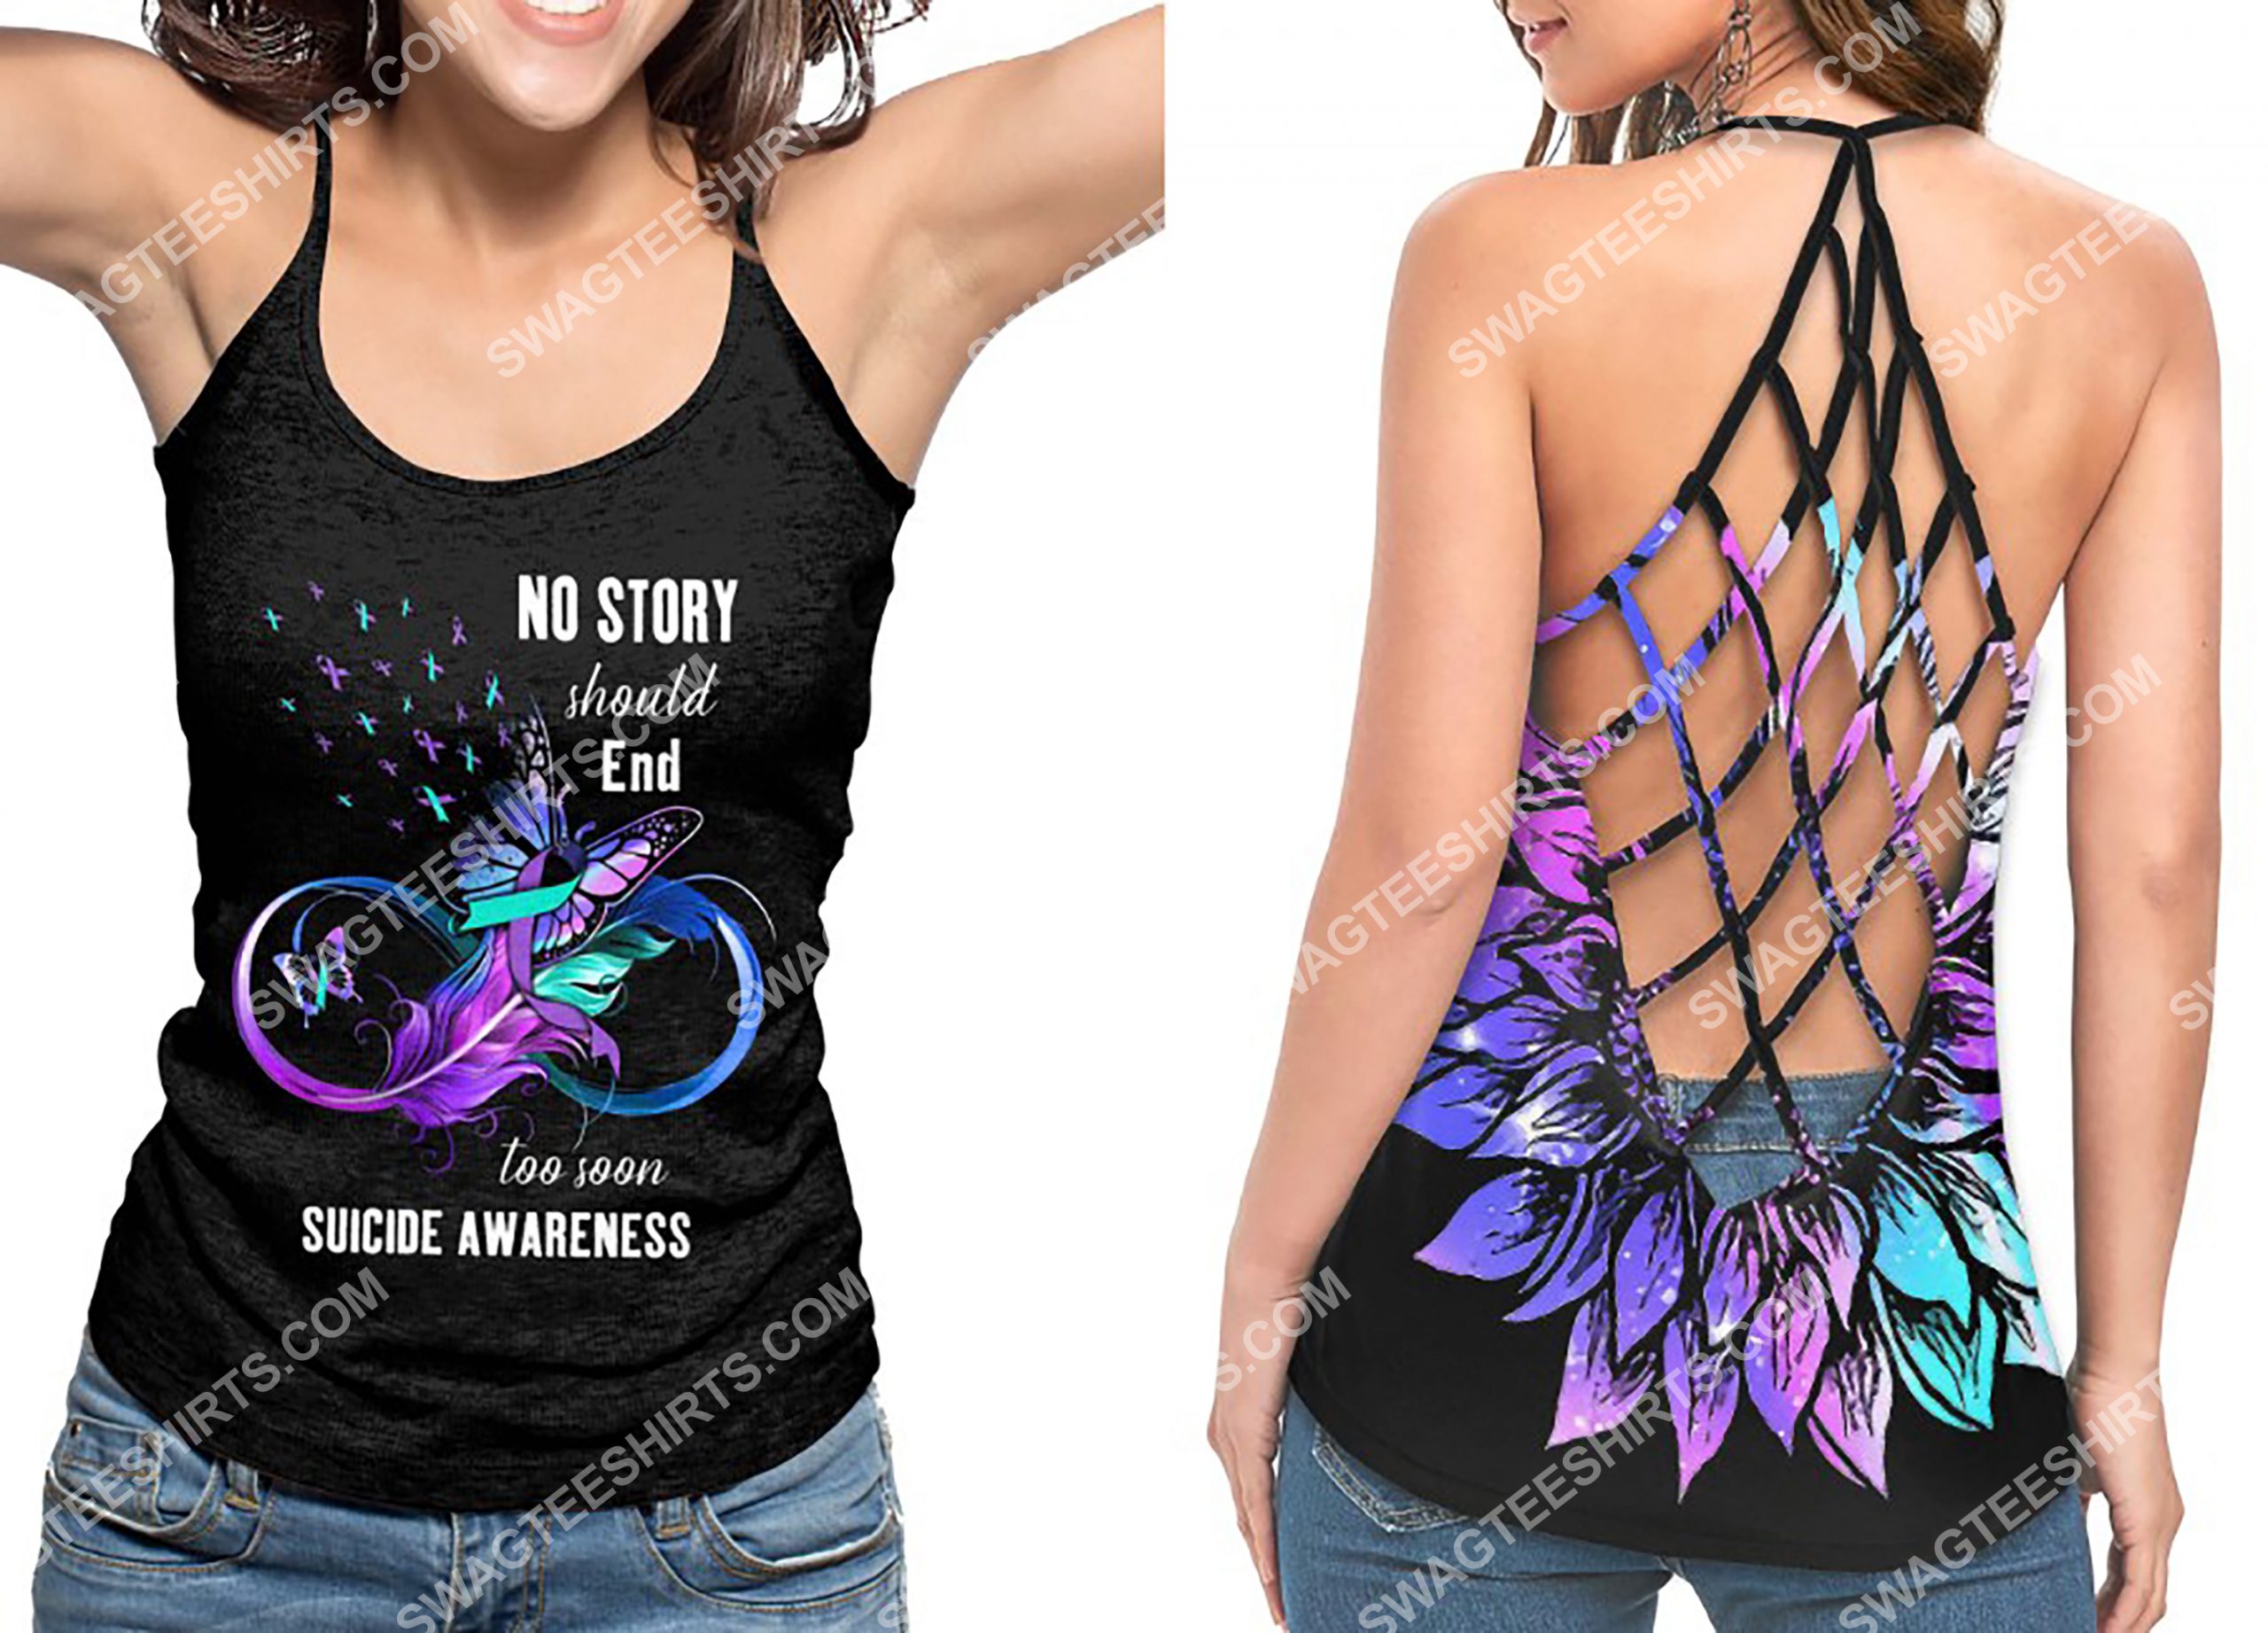 no story should end too soon suicide awareness strappy back tank top 2(1)